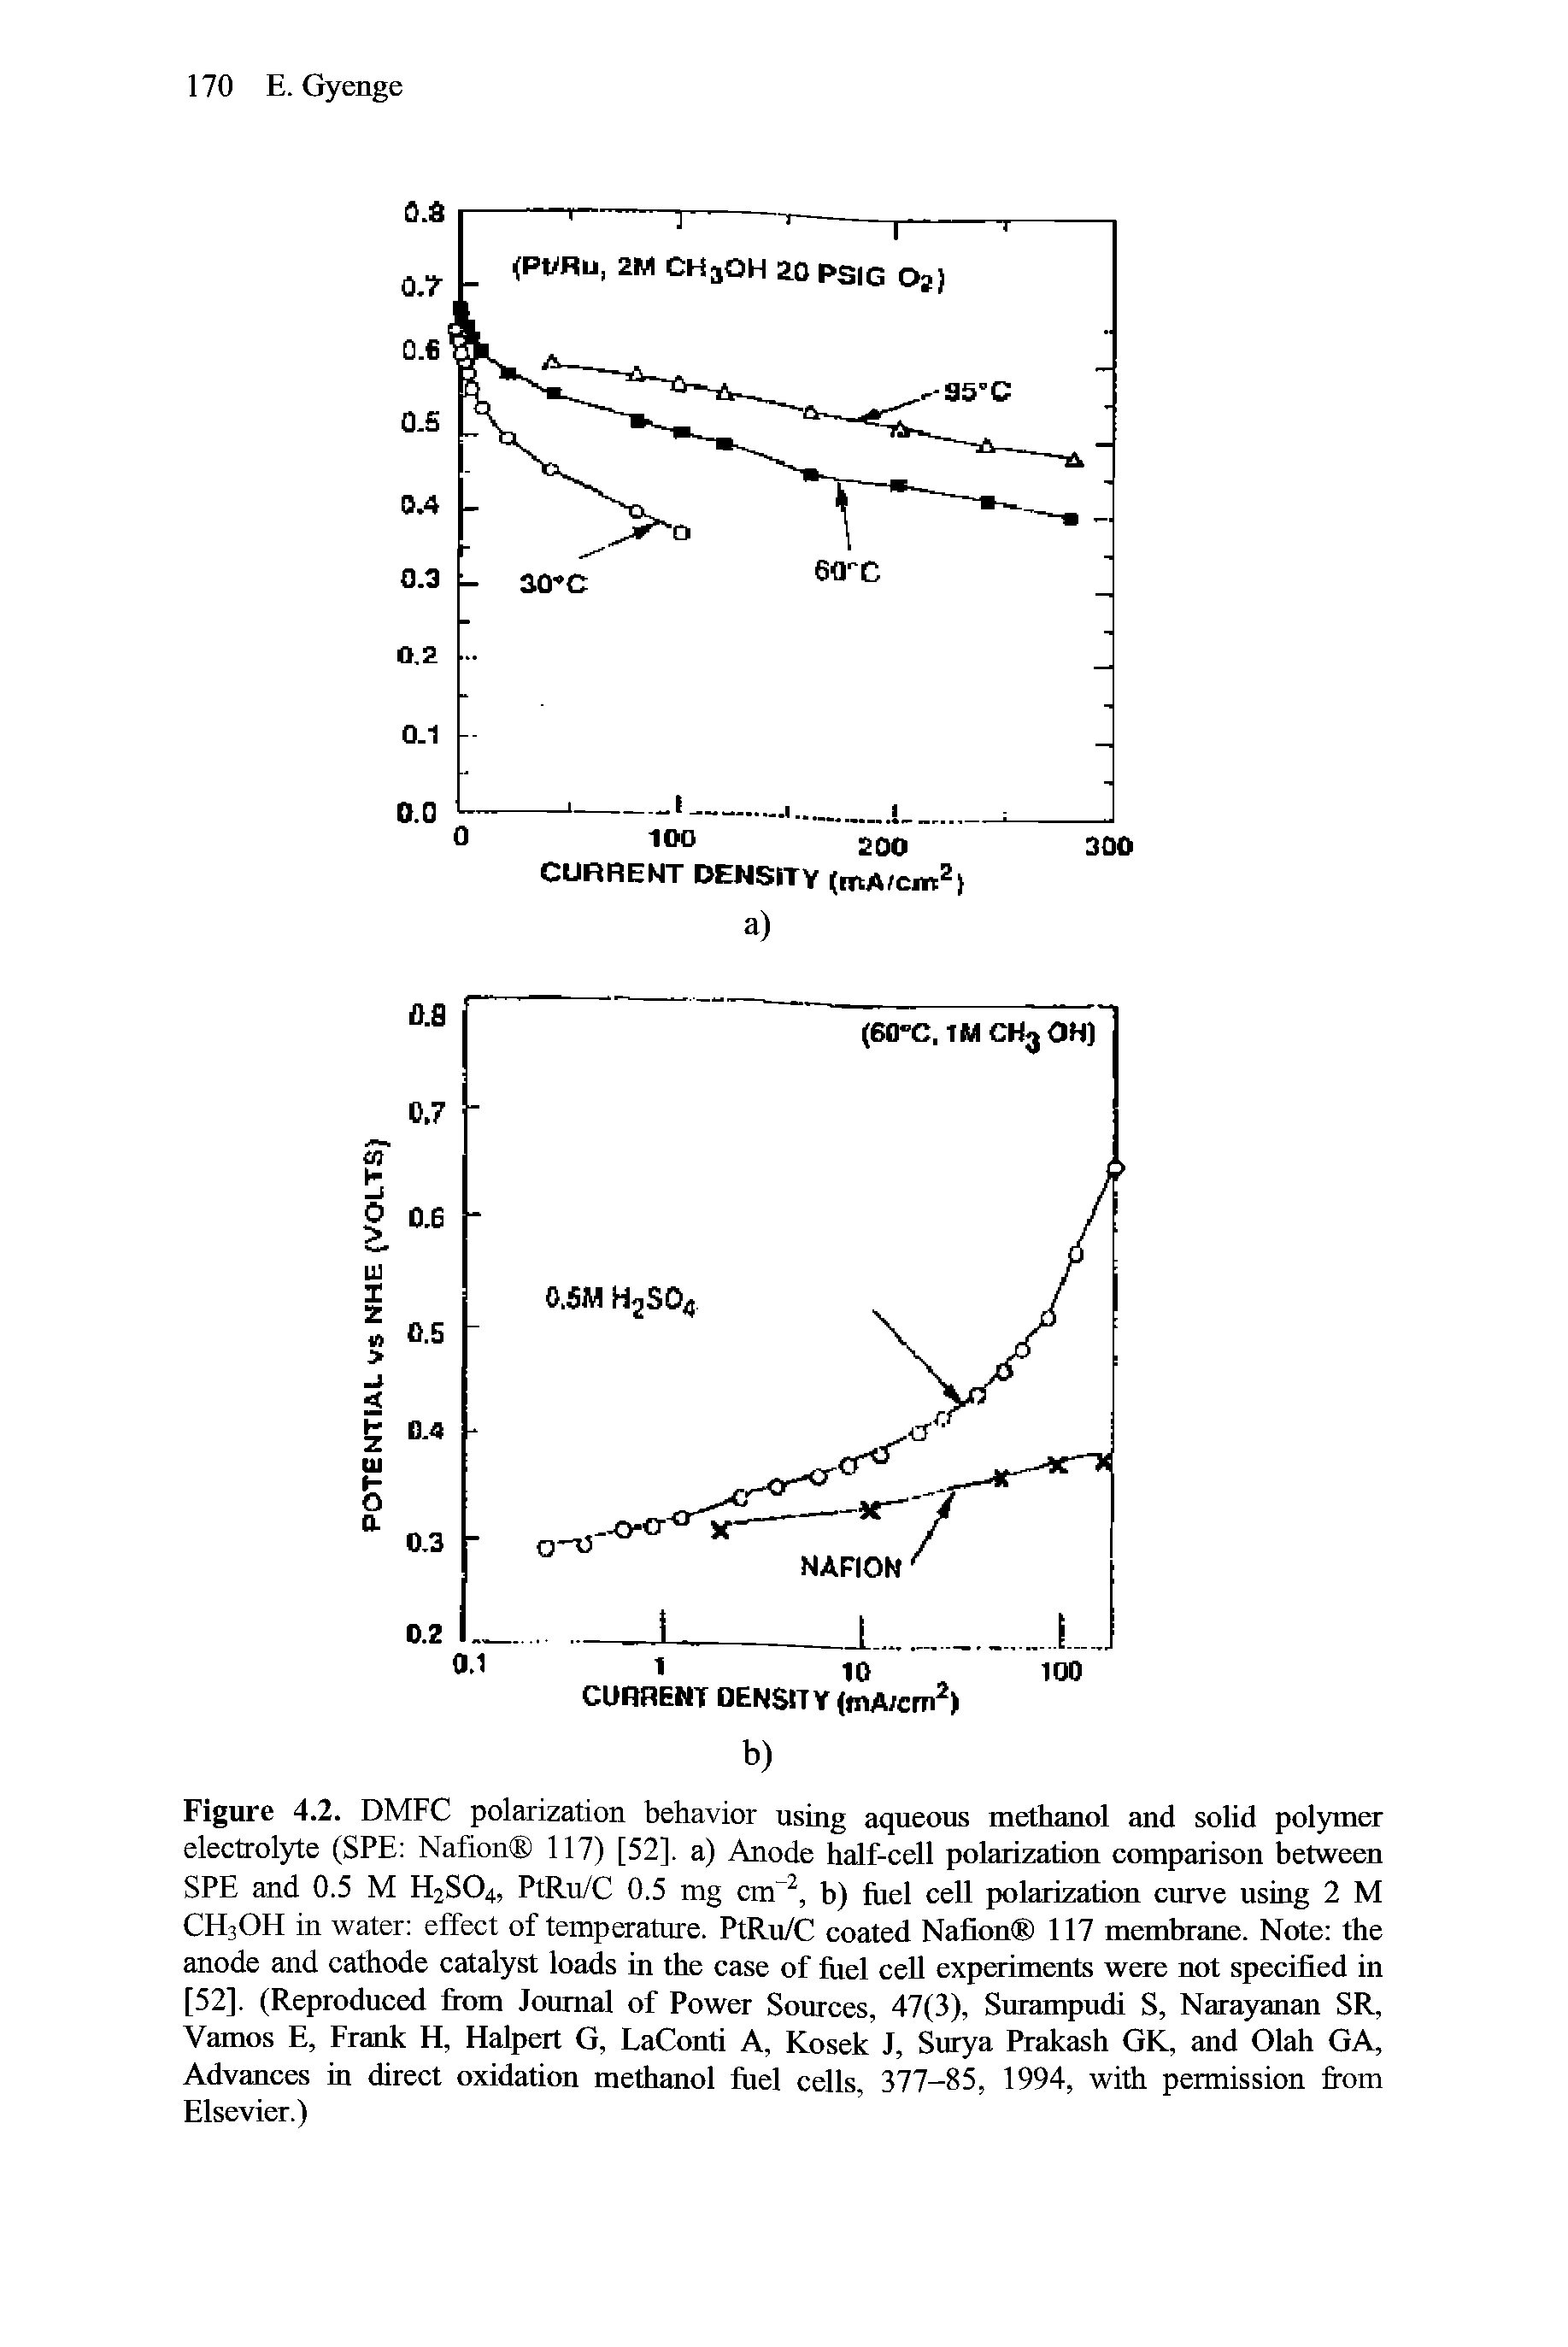 Figure 4.2. DMFC polarization behavior using aqueous methanol and solid polymer electrolyte (SPE Nafion 117) [52]. a) Anode half-cell polarization comparison between SPE and 0.5 M H2SO4, PtRu/C 0.5 mg cm, b) fuel cell polarization curve using 2 M CH3OH in water effect of temperature. PtRu/C coated Nafion 117 membrane. Note the anode and cathode catalyst loads in the case of fuel cell experiments were not specified in [52]. (Reproduced Ifom Journal of Power Sources, 47(3), Surampudi S, Narayanan SR, Vamos E, Frank H, Halpert G, LaConti A, Kosek J, Surya Prakash GK, and Olah GA, Advances in direct oxidation methanol fuel cells, 377-85, 1994, with permission fi-om Elsevier.)...